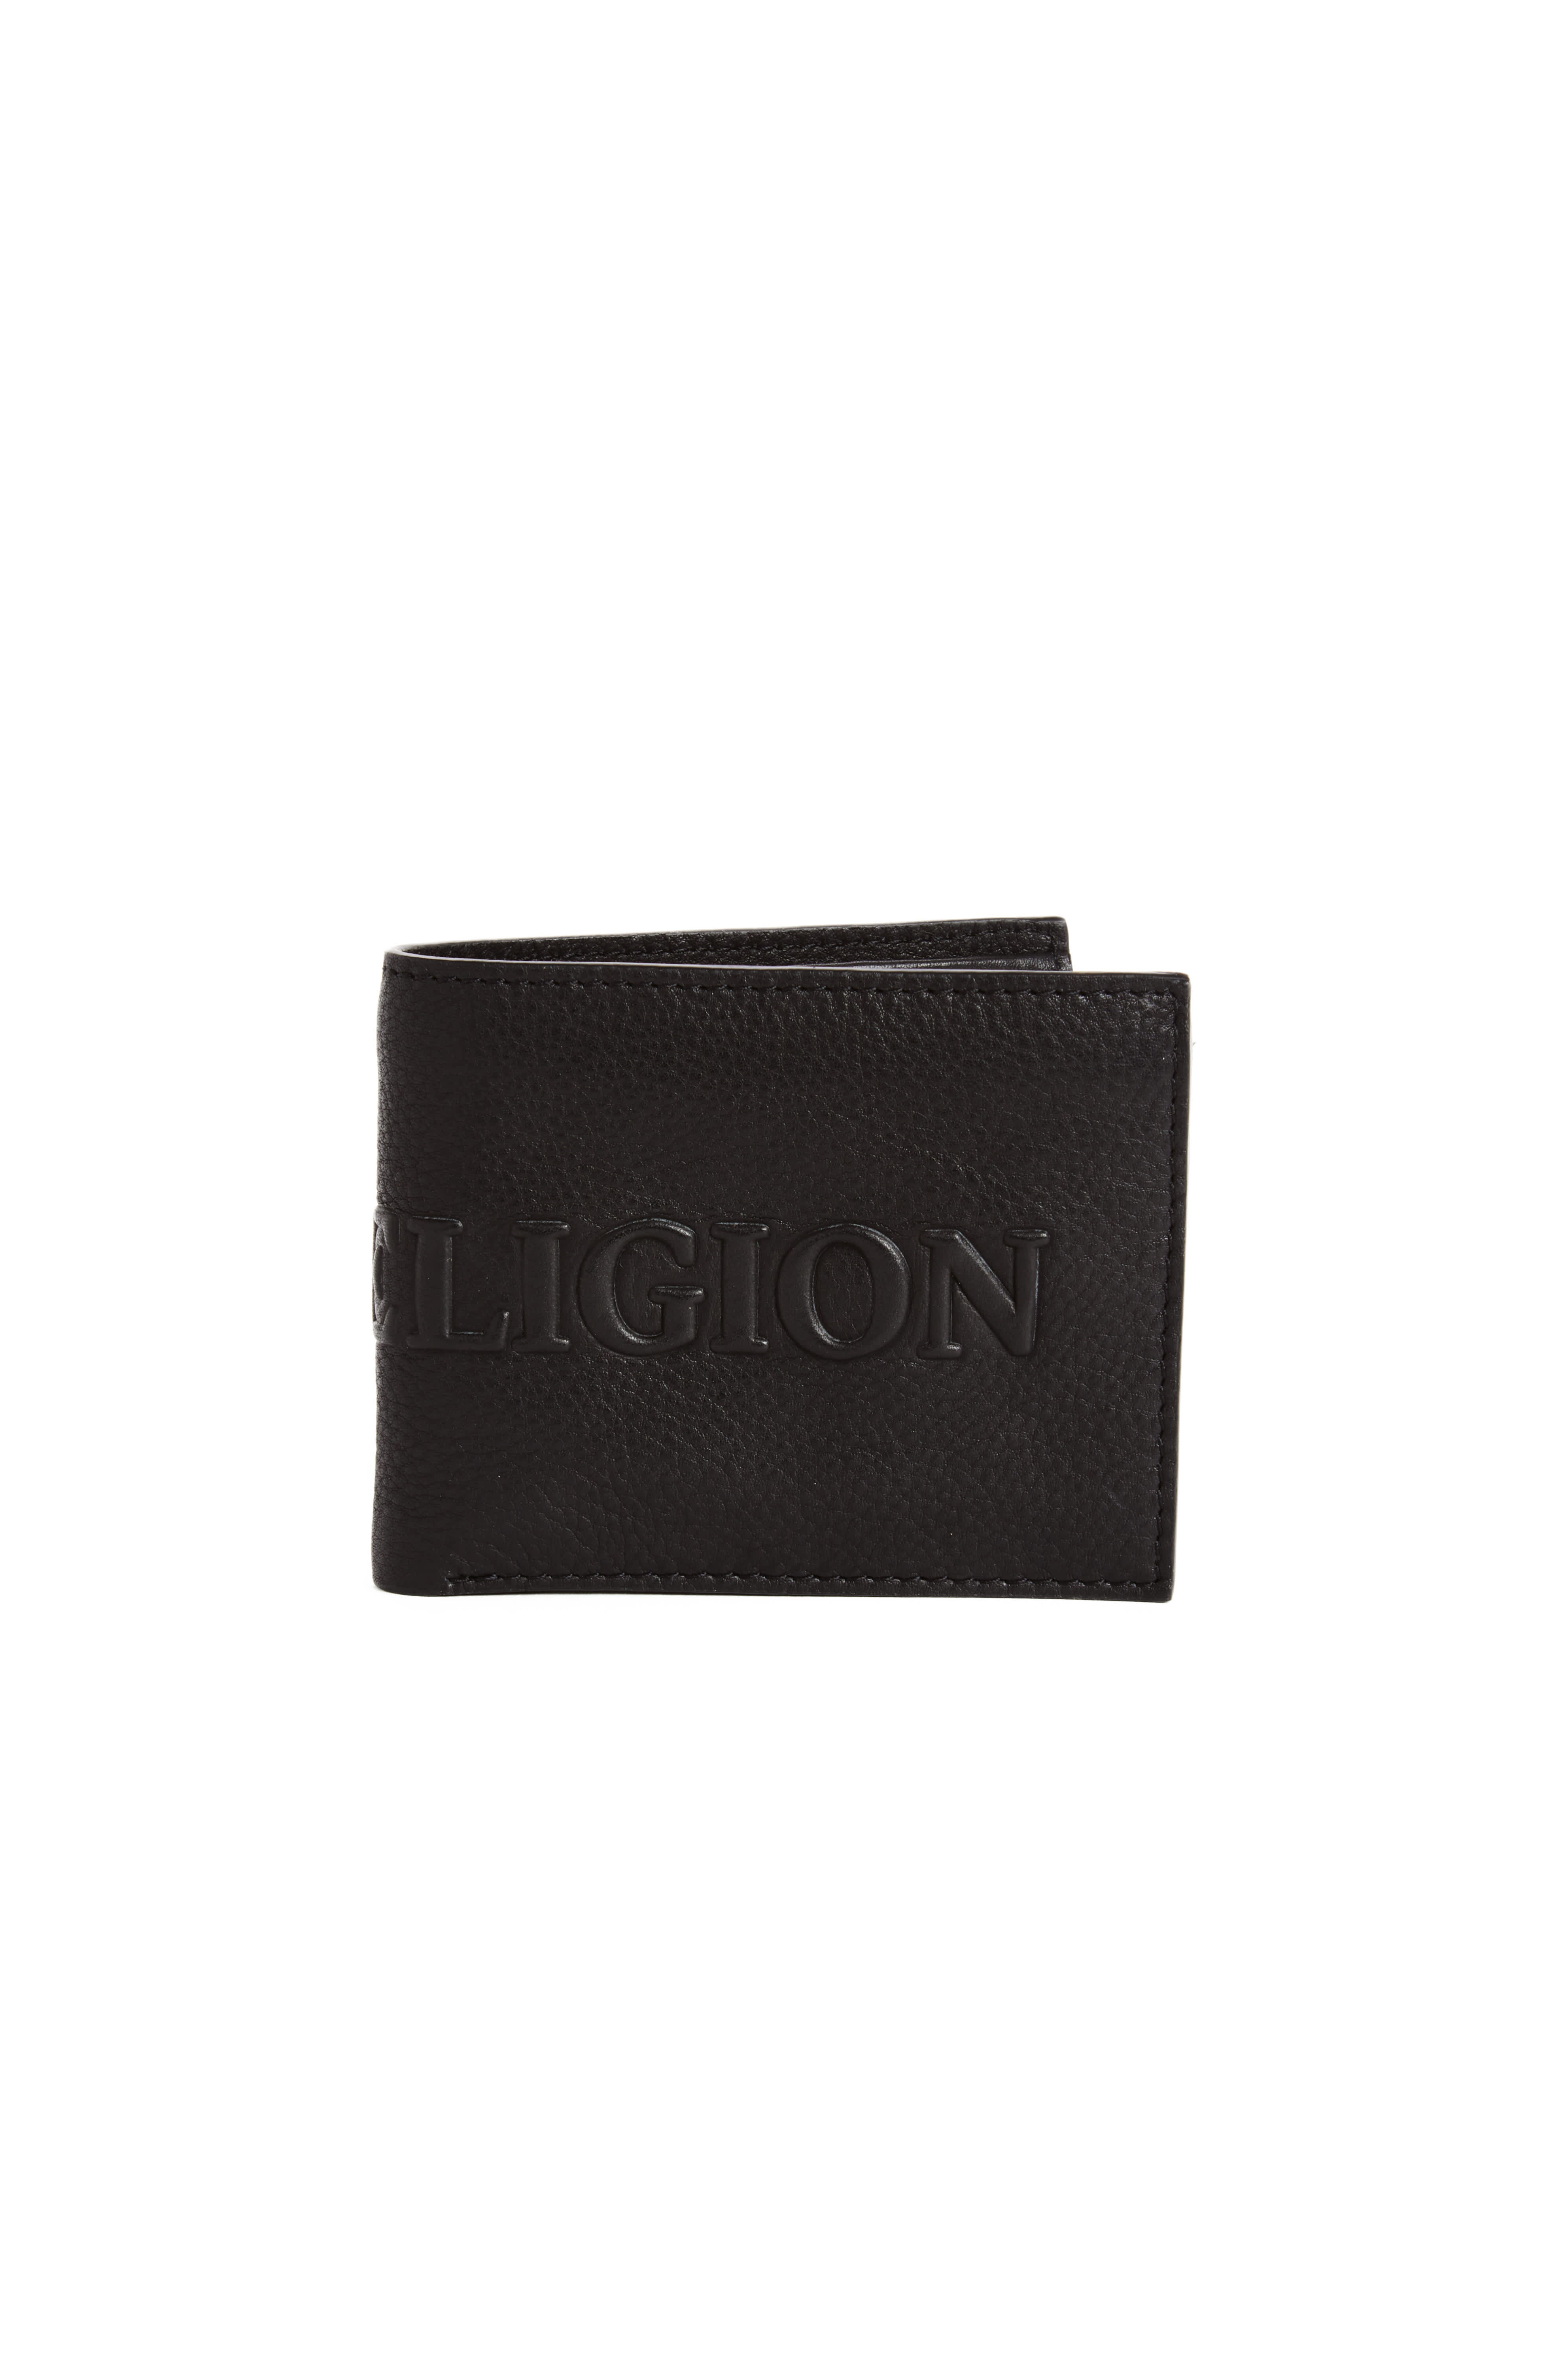 EMBOSSED LEATHER UTILITY BIFOLD WALLET